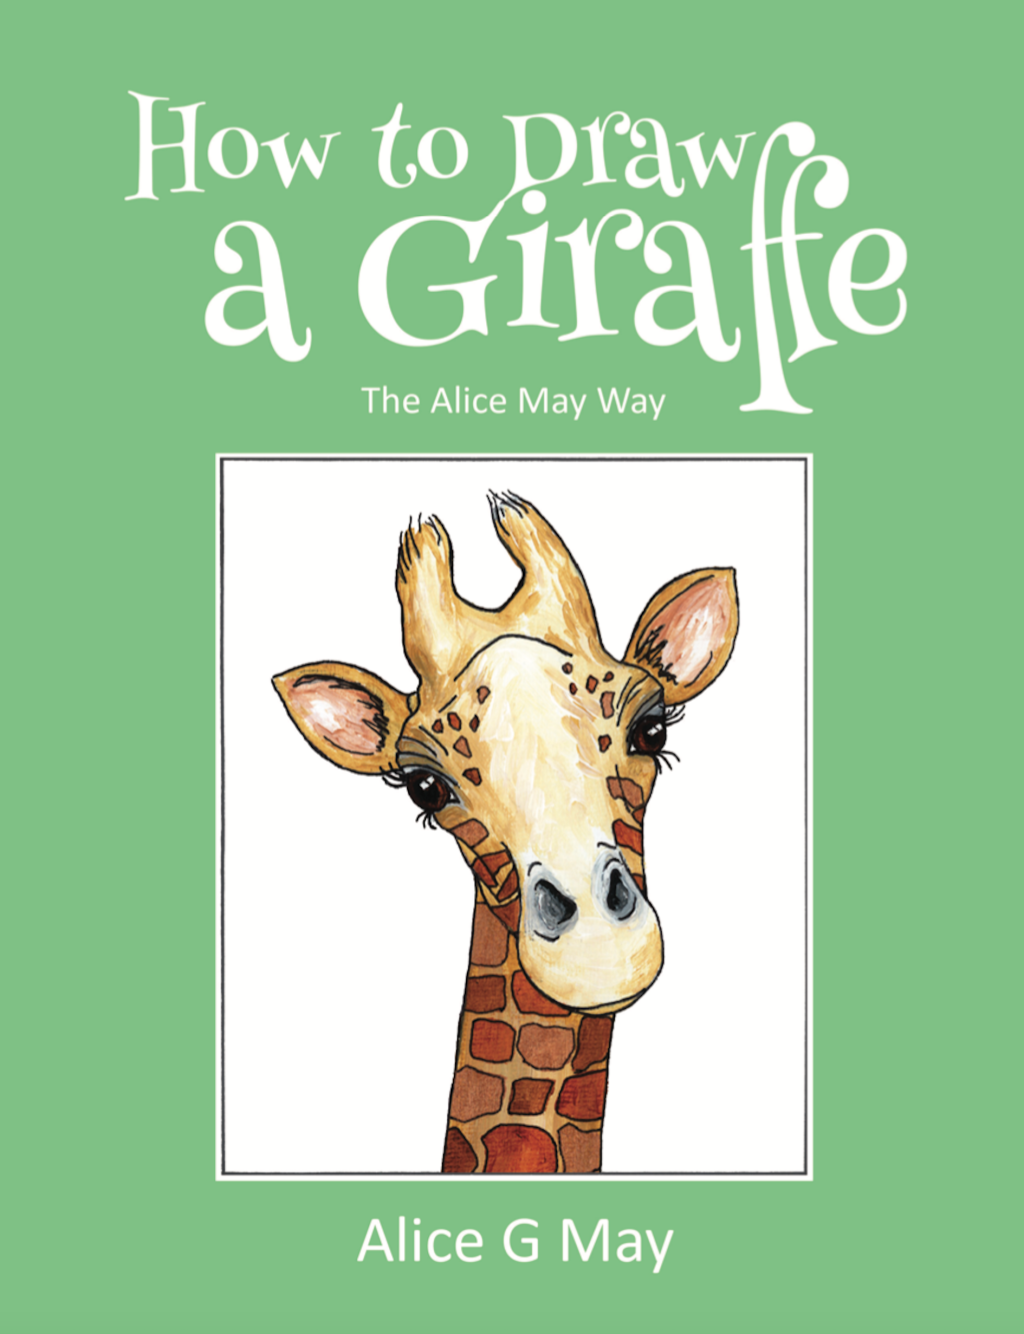 How to Draw A Giraffe – The Alice May Way @rararesources #AD #PrProduct #Blogtour #HowToDrawAGiraffe